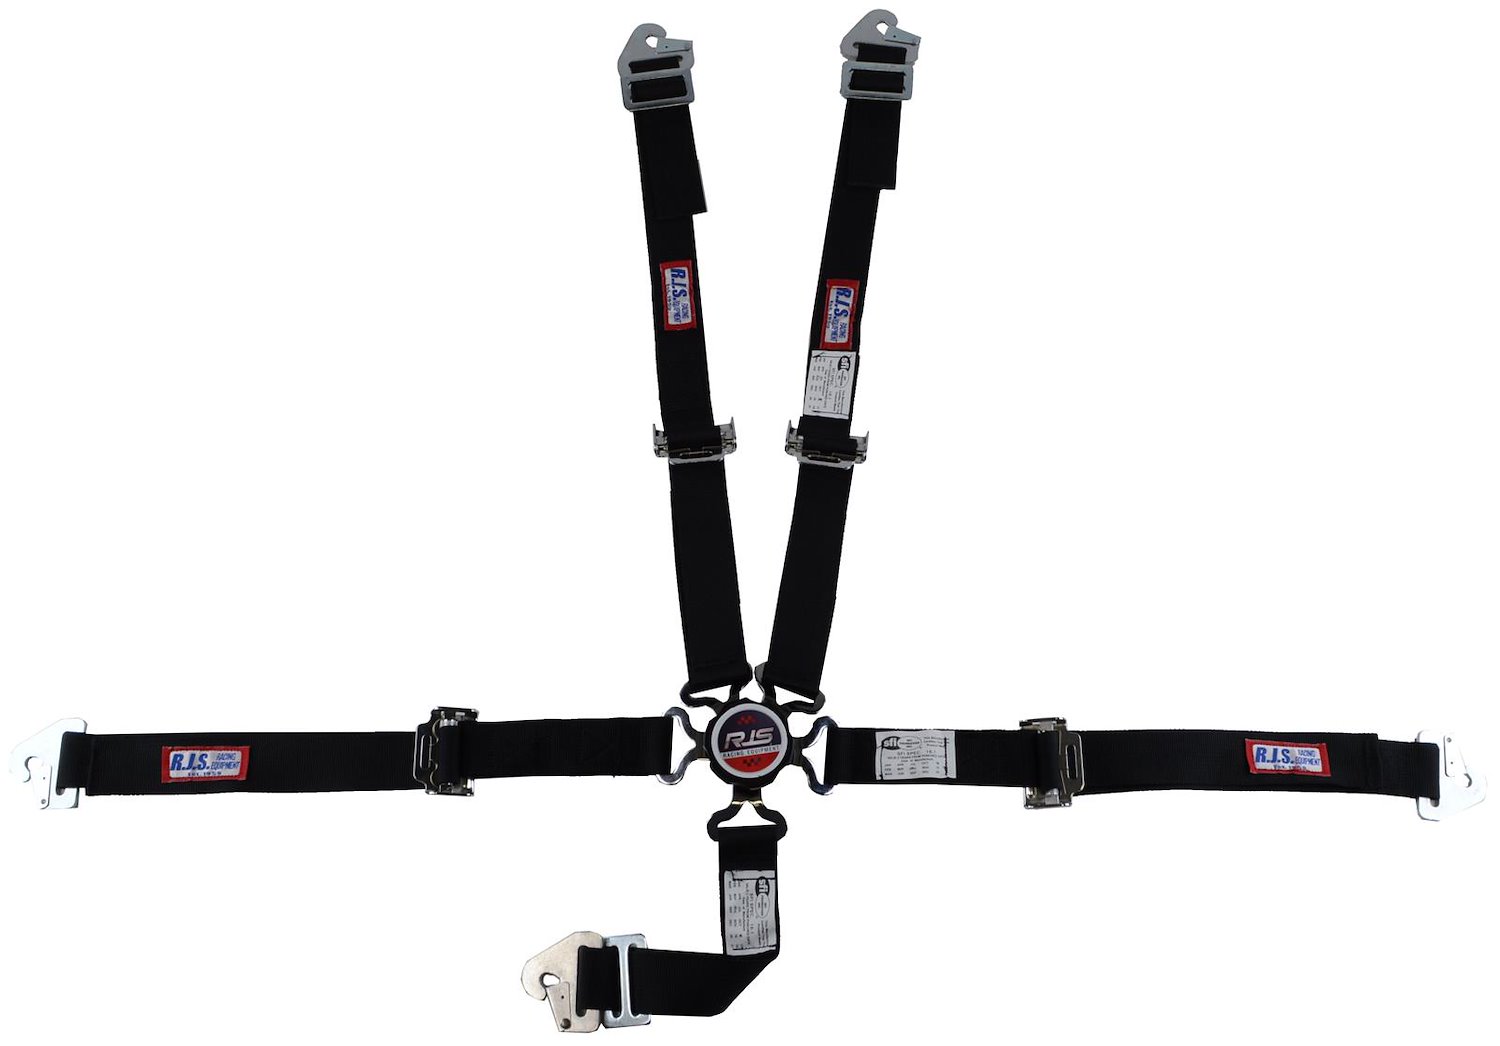 SFI 16.1 CAM-LOCK HARNESS 2 PULL UP Lap Belt 2 Shoulder Harness V ROLL BAR Mount 2 DOUBLE Sub ALL SNAP ENDS HOT PINK